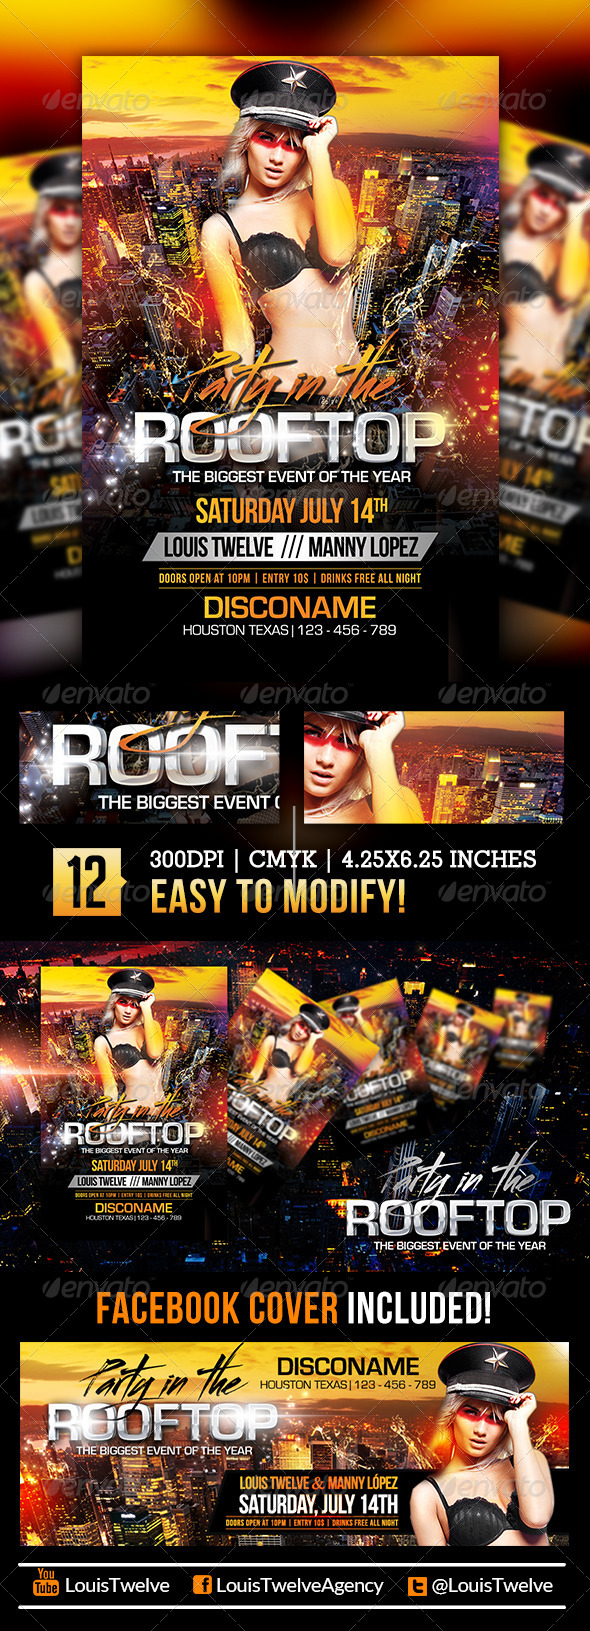 Party in the Rooftop | Flyer + Facebook Cover